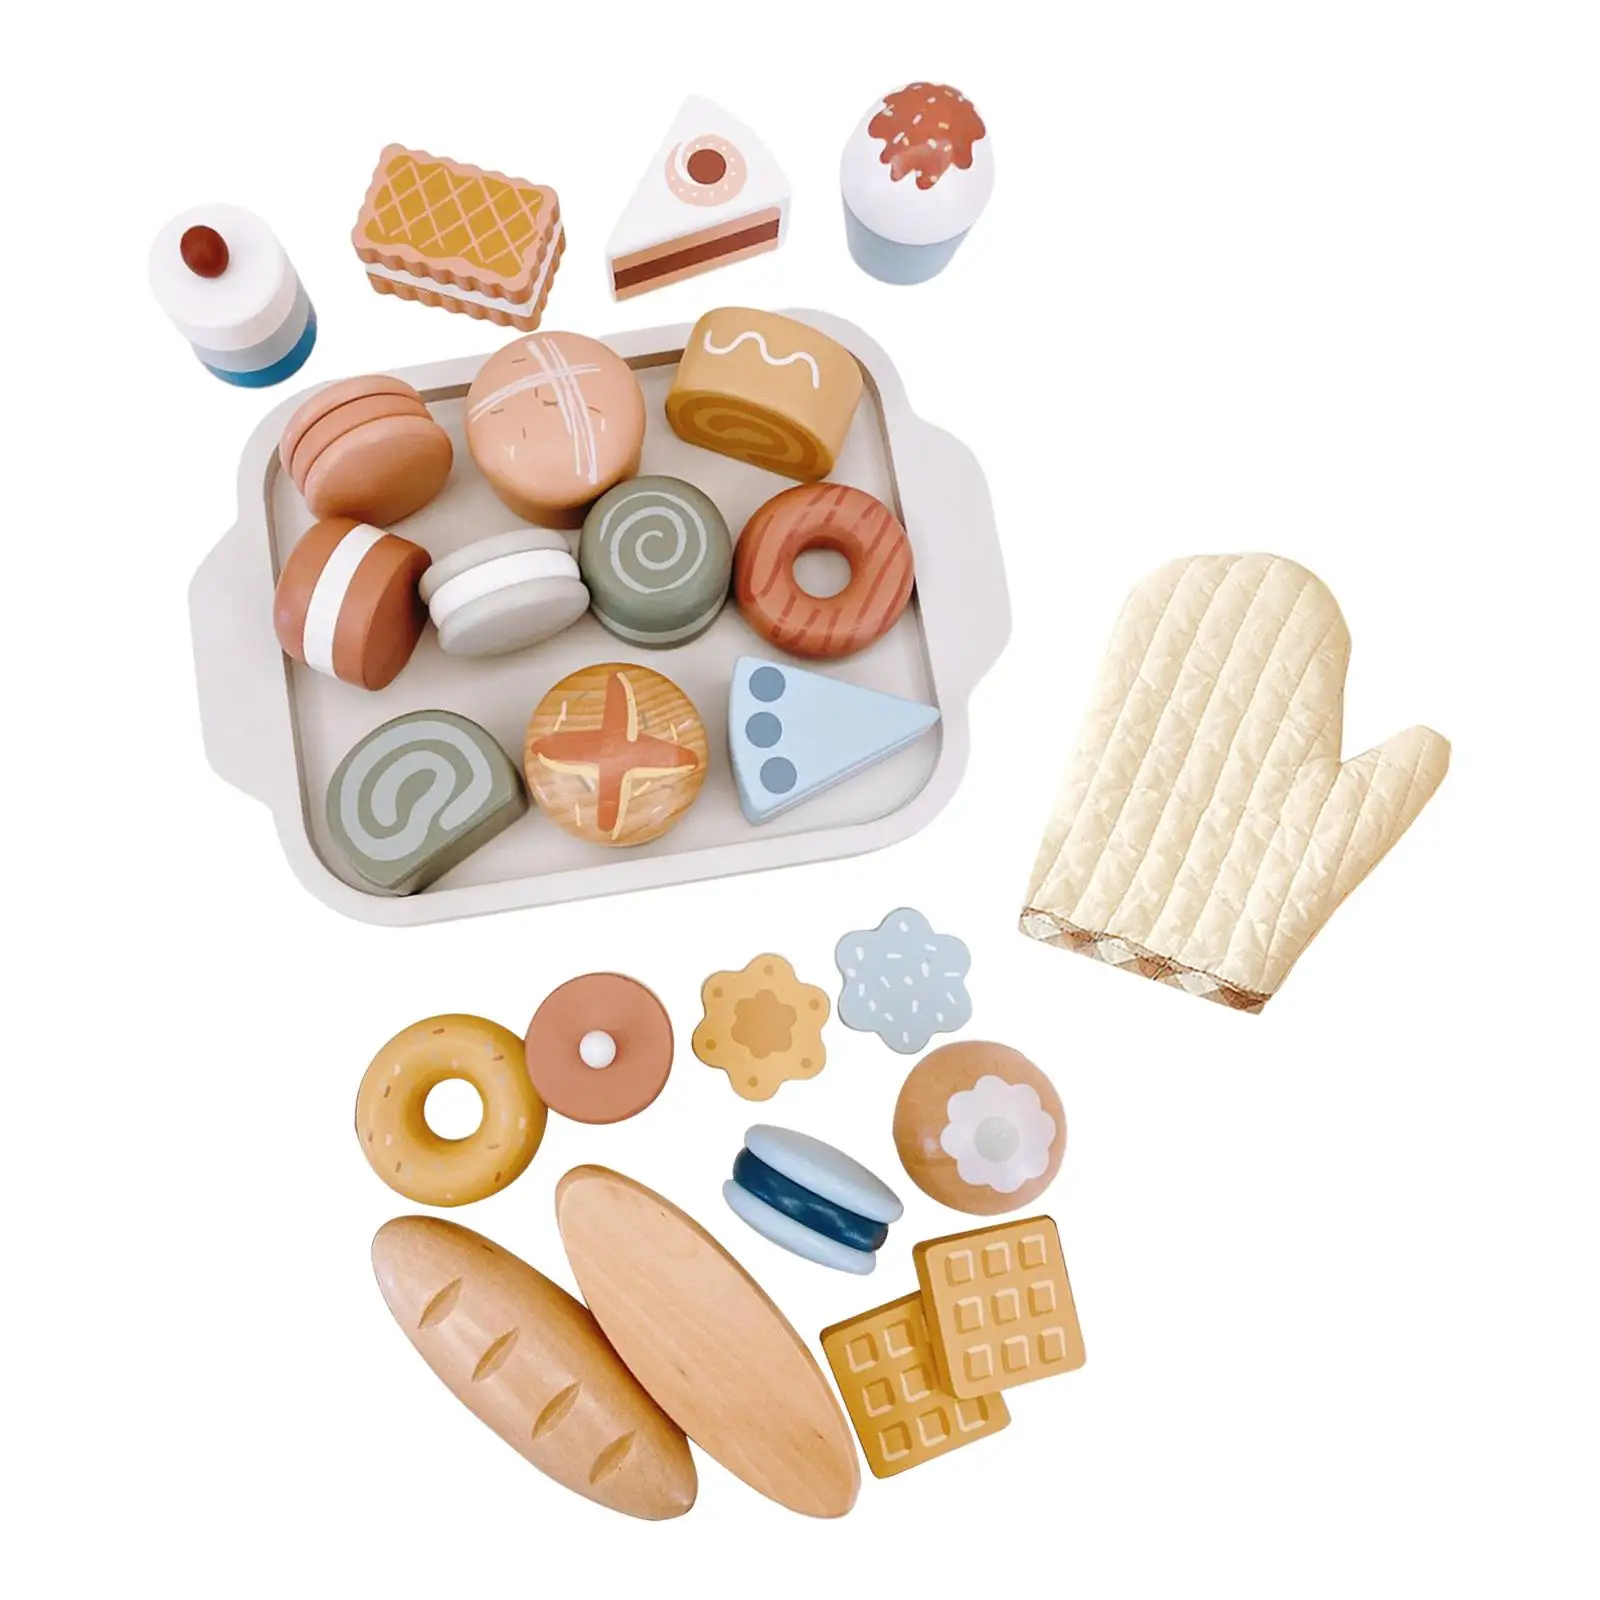 Pretend Play Food Set Montessori Simulation Wooden Pretend Play Sets for Gift Furnishings Party Favors Window Display Handcraft